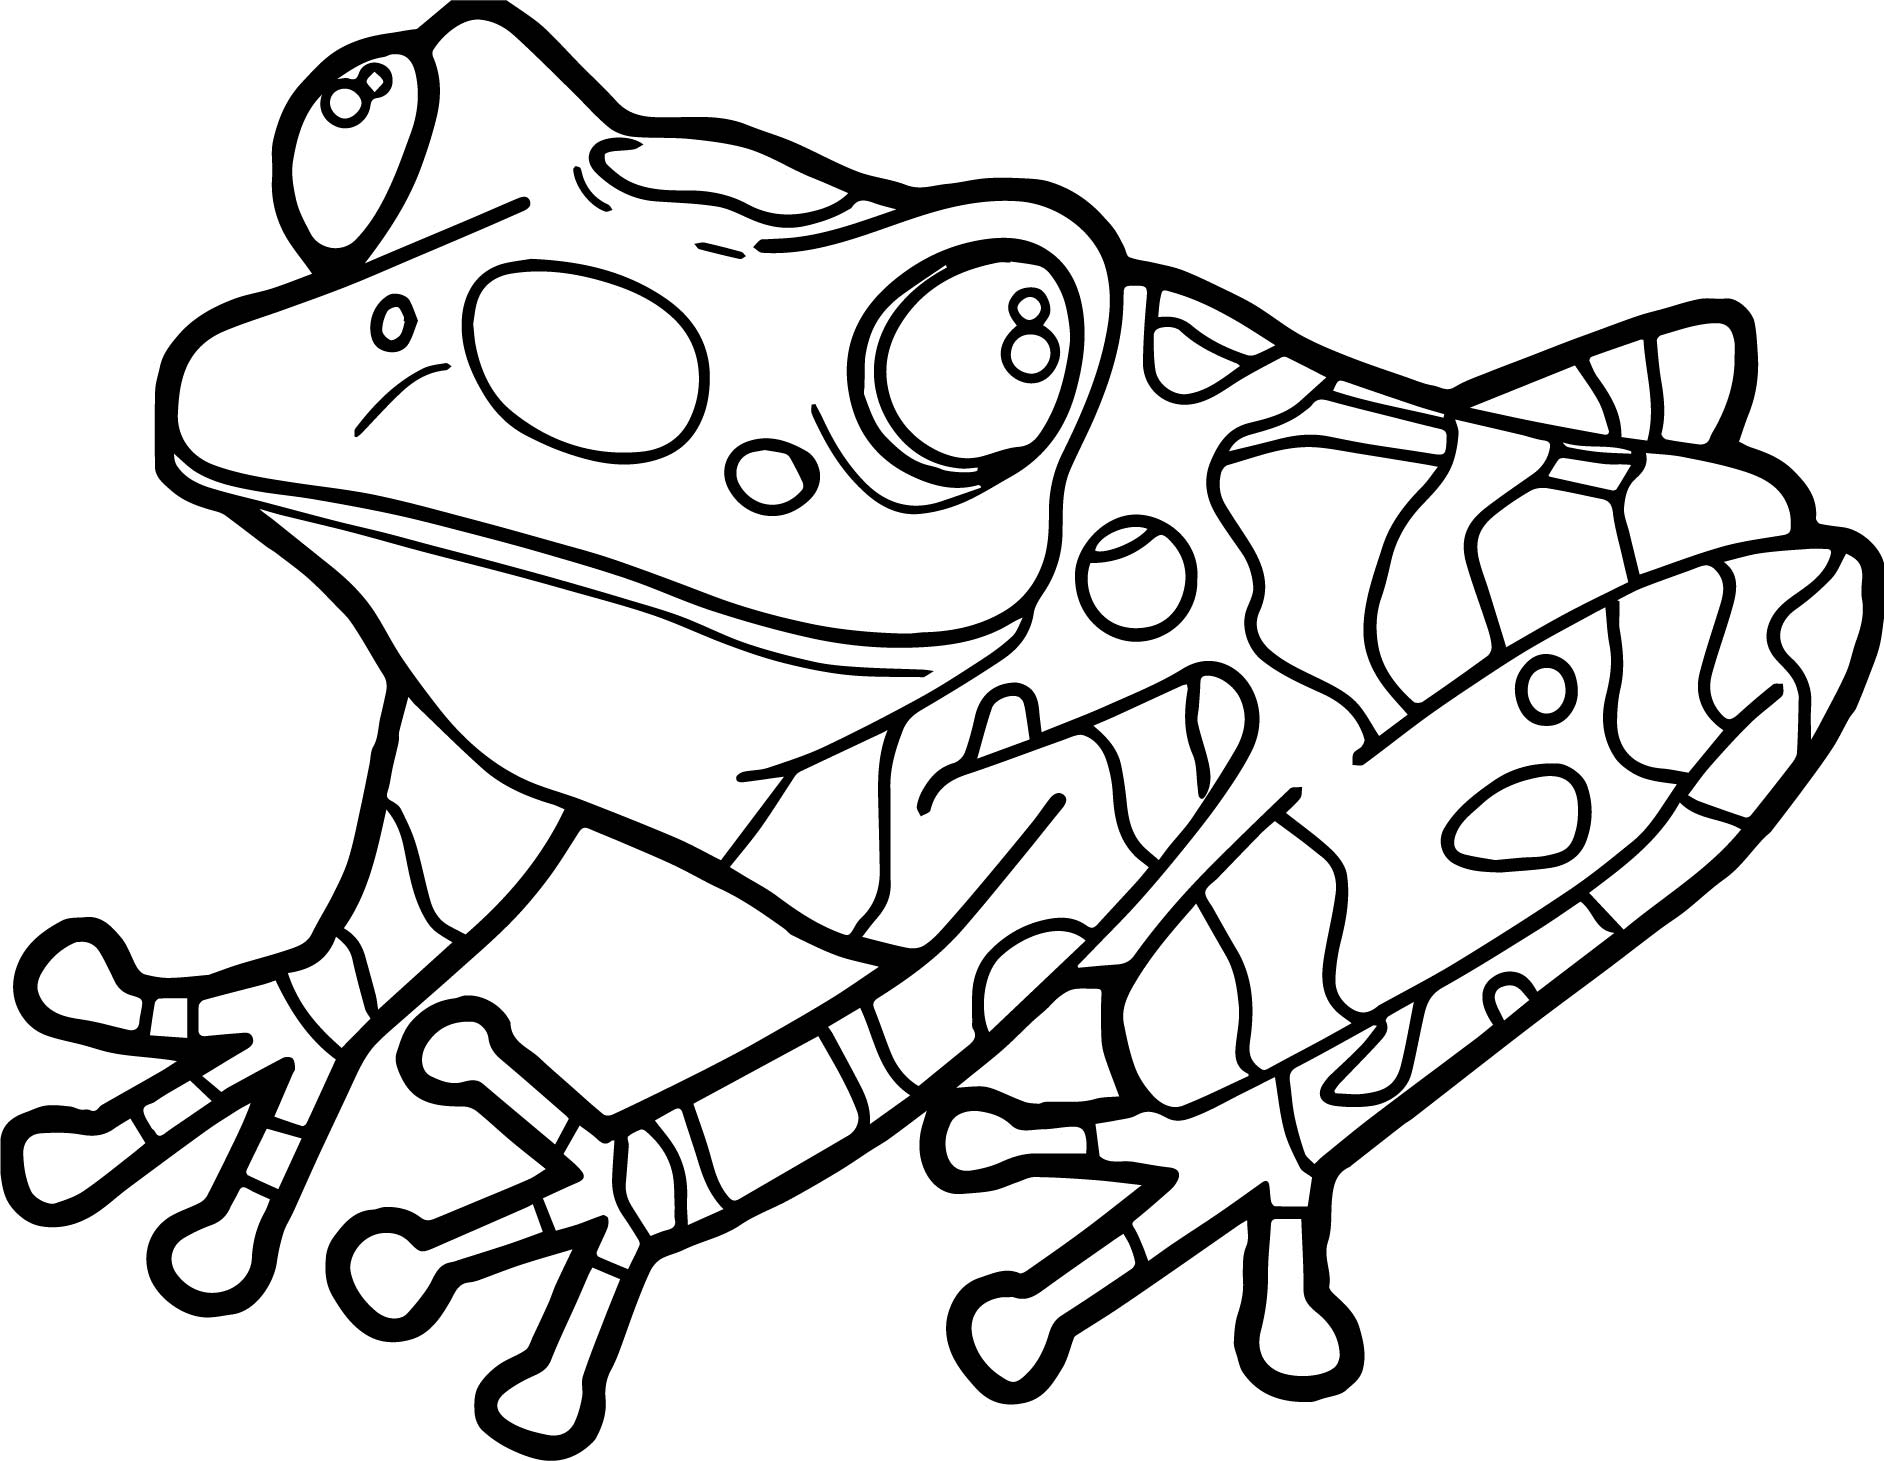 Rainforest Frog Coloring Page Realistic Frog Coloring Pages Free Download Best Realistic Frog